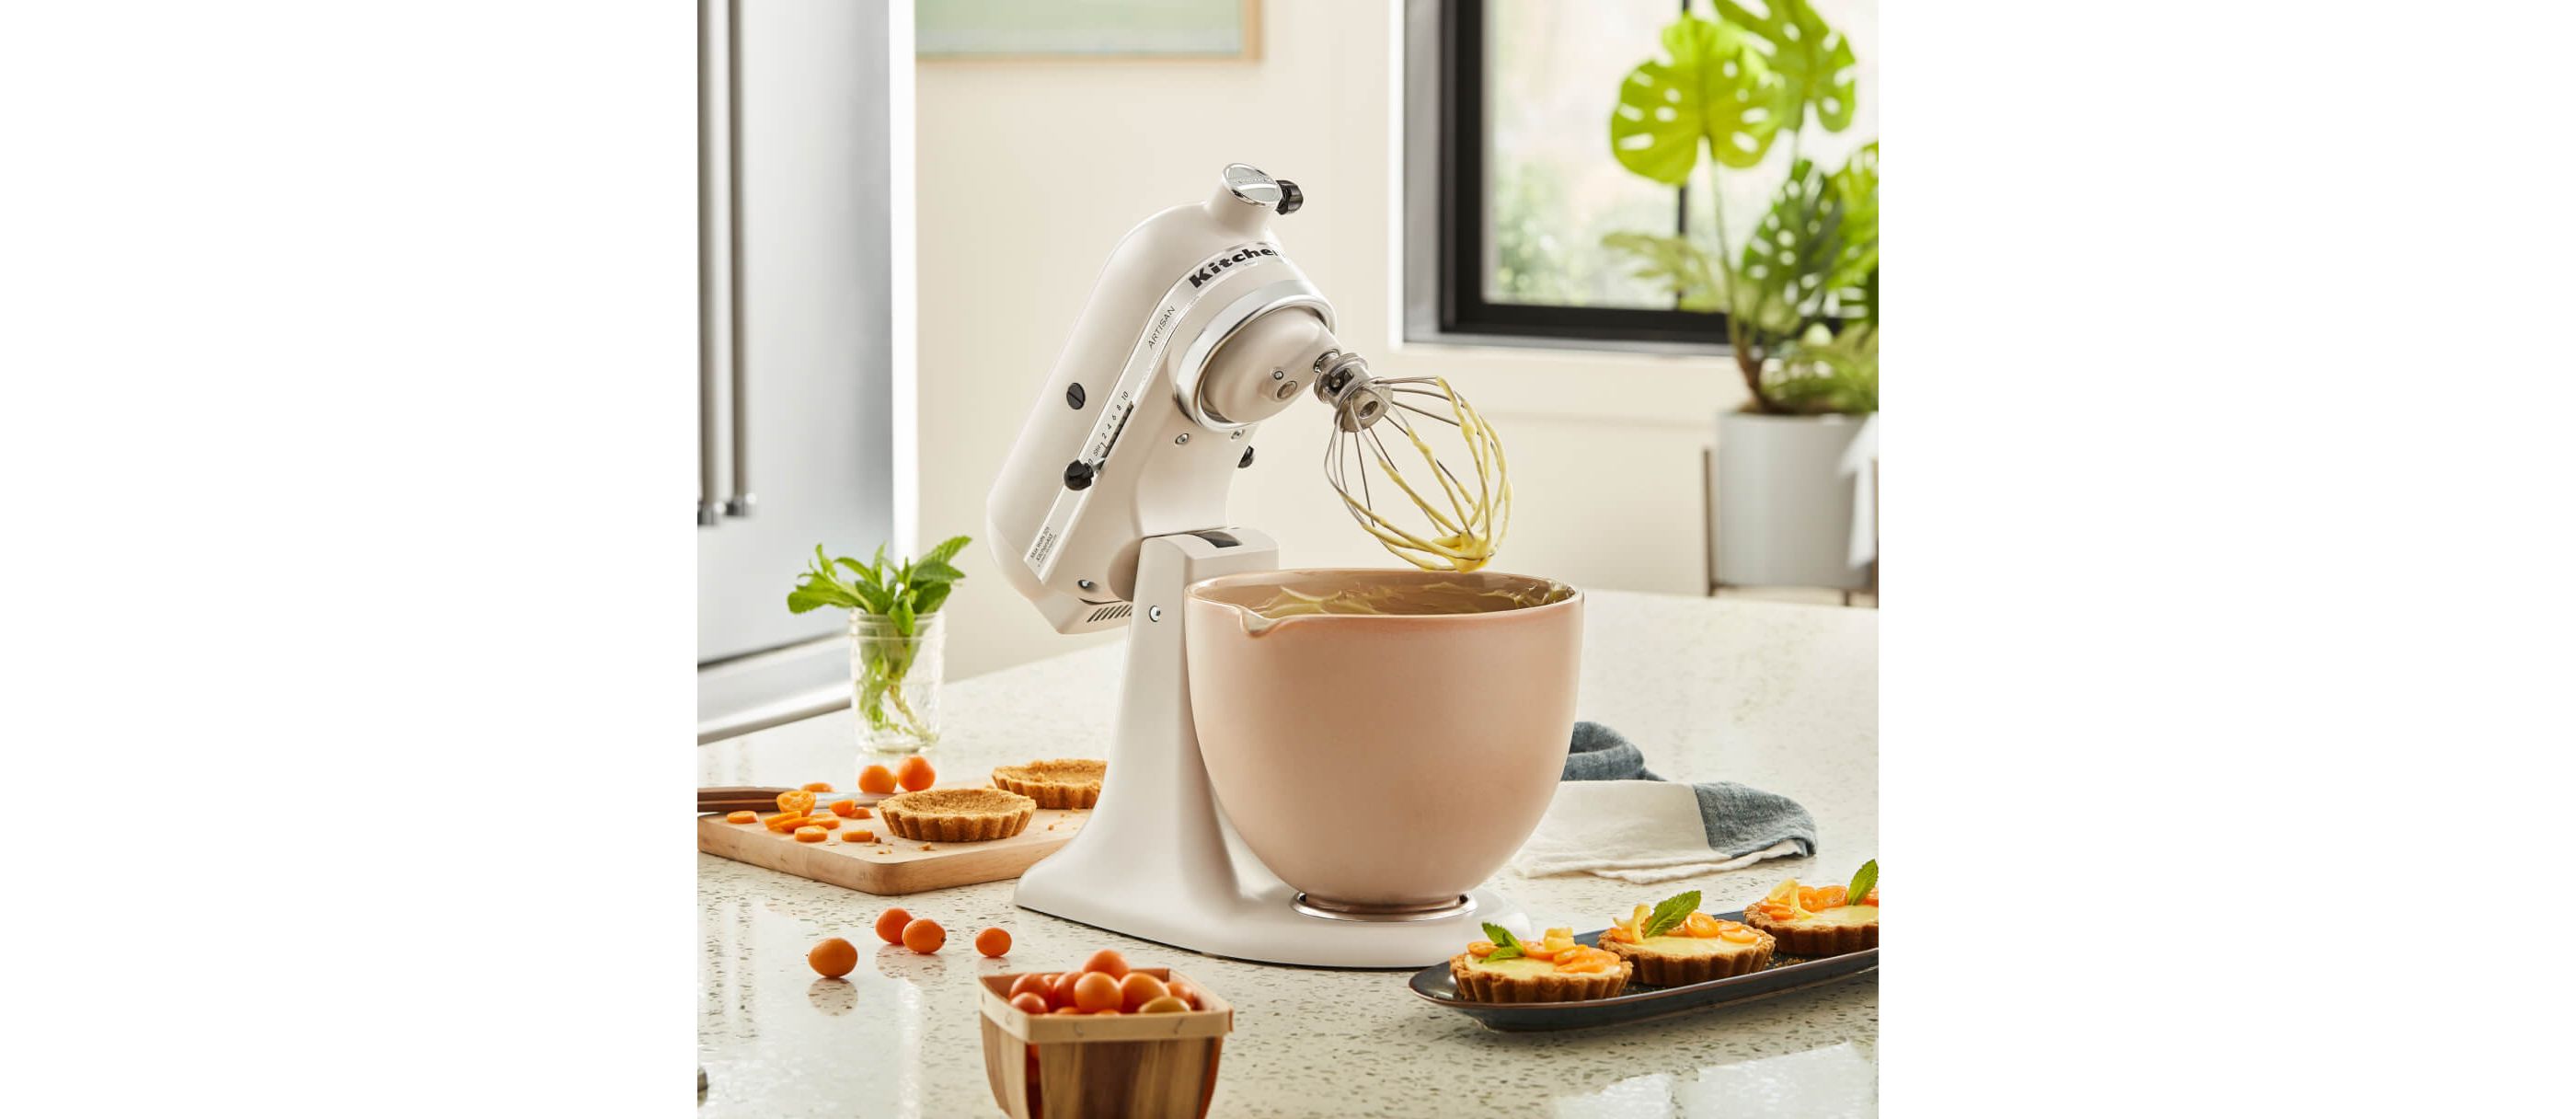 KitchenAid Just Released Their Vegetable-Inspired Color Of The